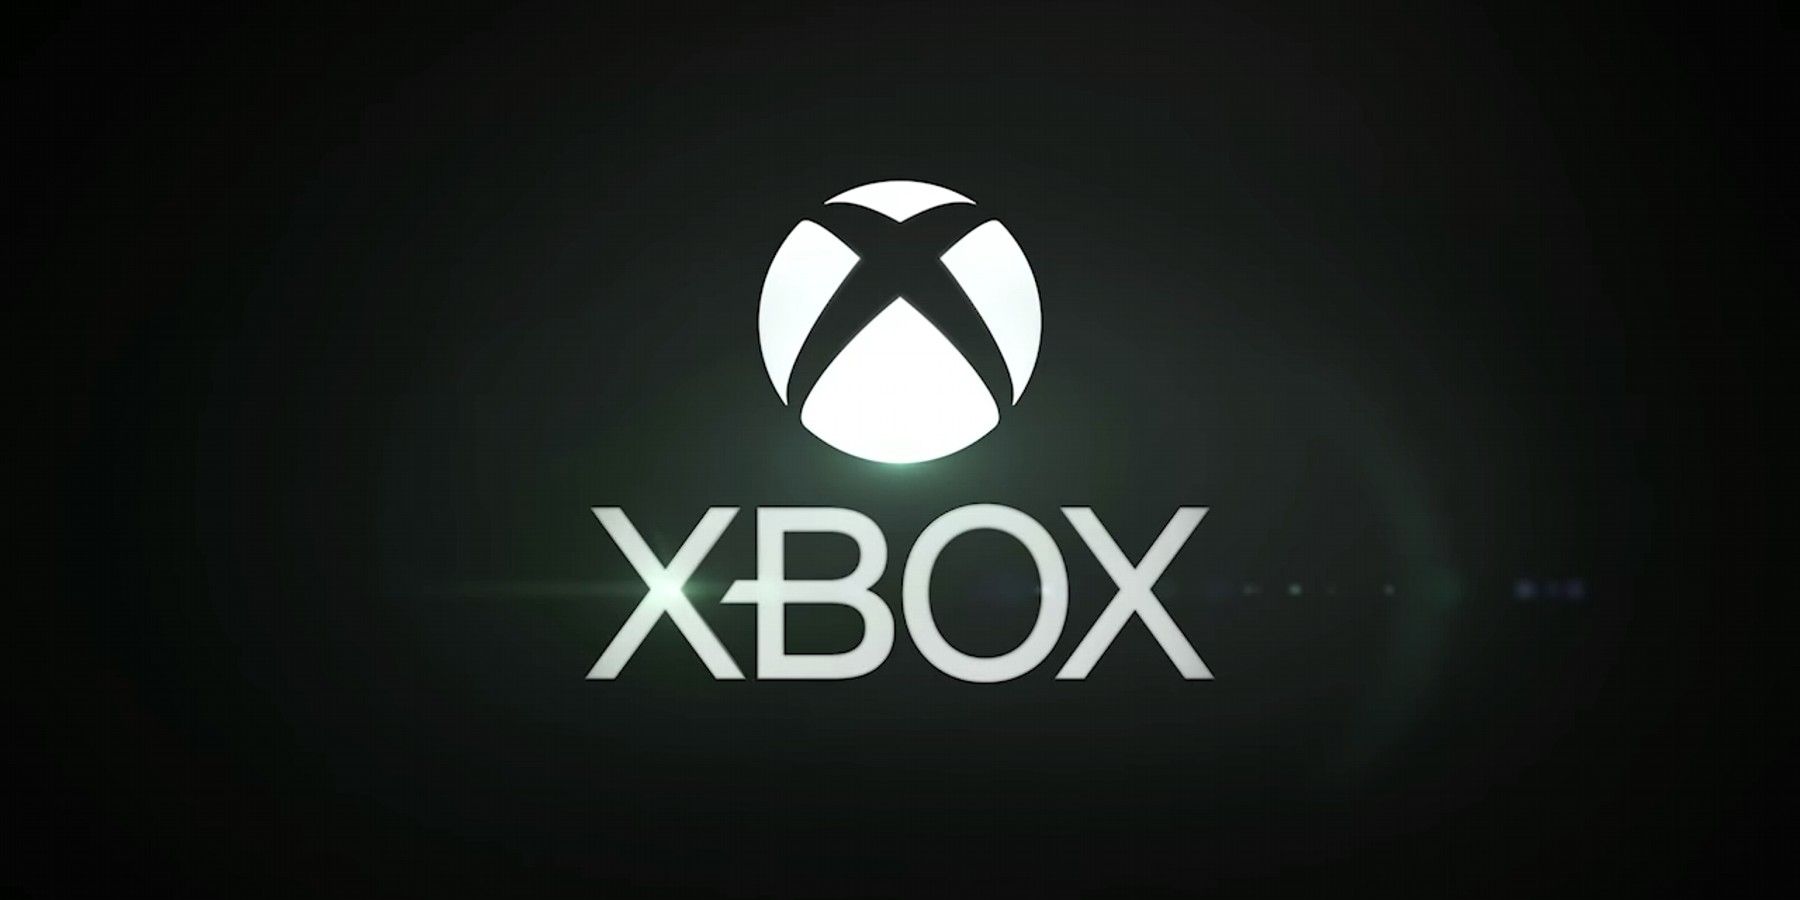 Future Xbox Update Will Let Players Mute Startup Sounds